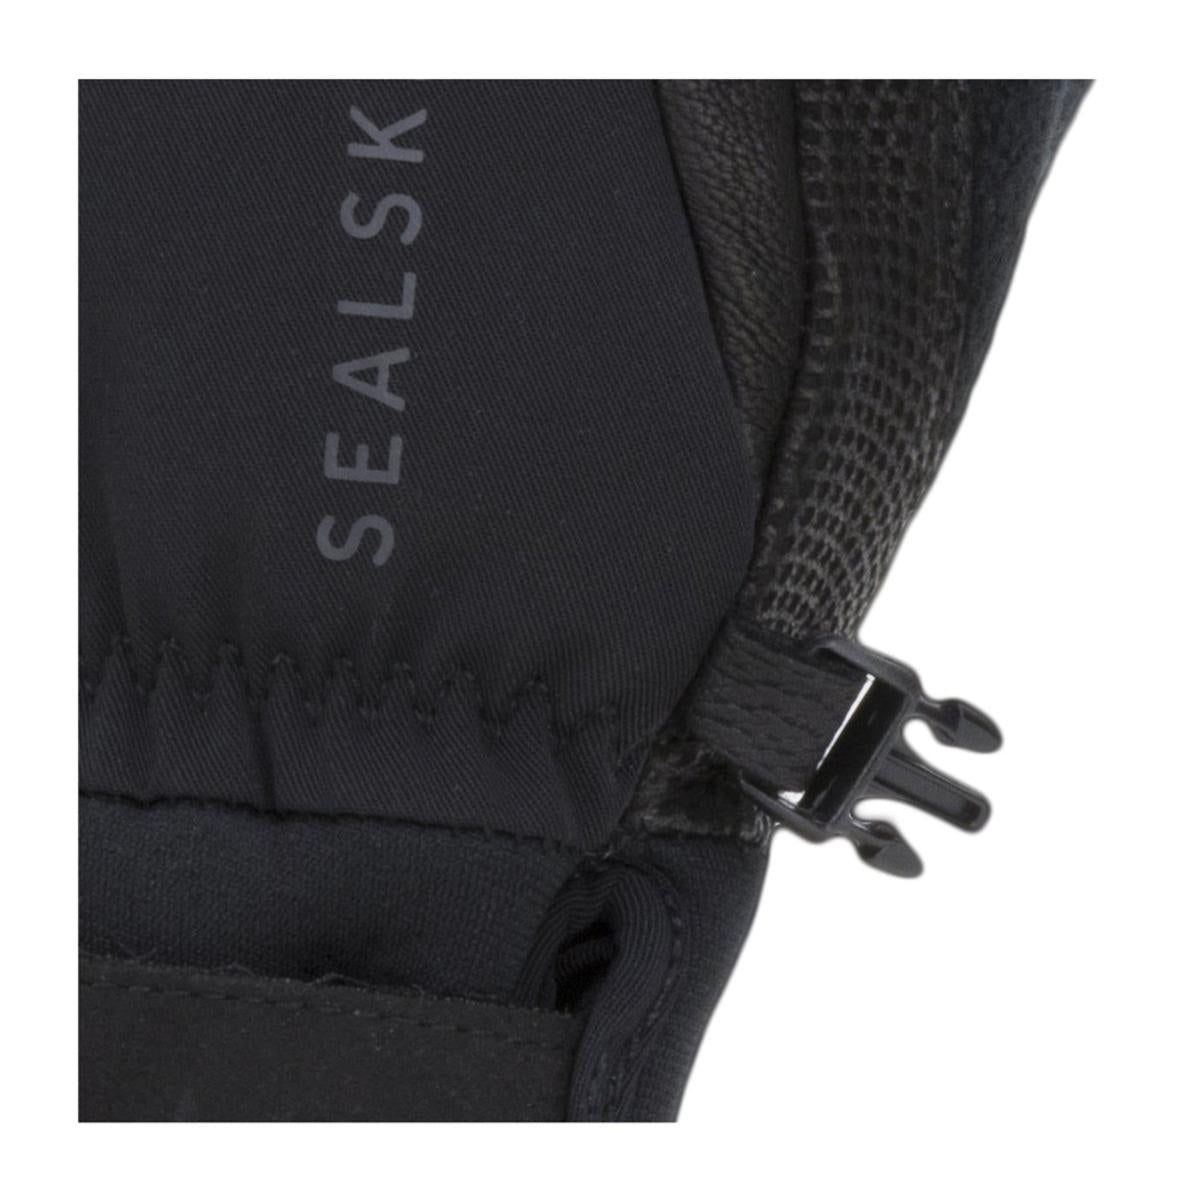 Sealskinz Men's Waterproof Extreme Cold Weather Gloves